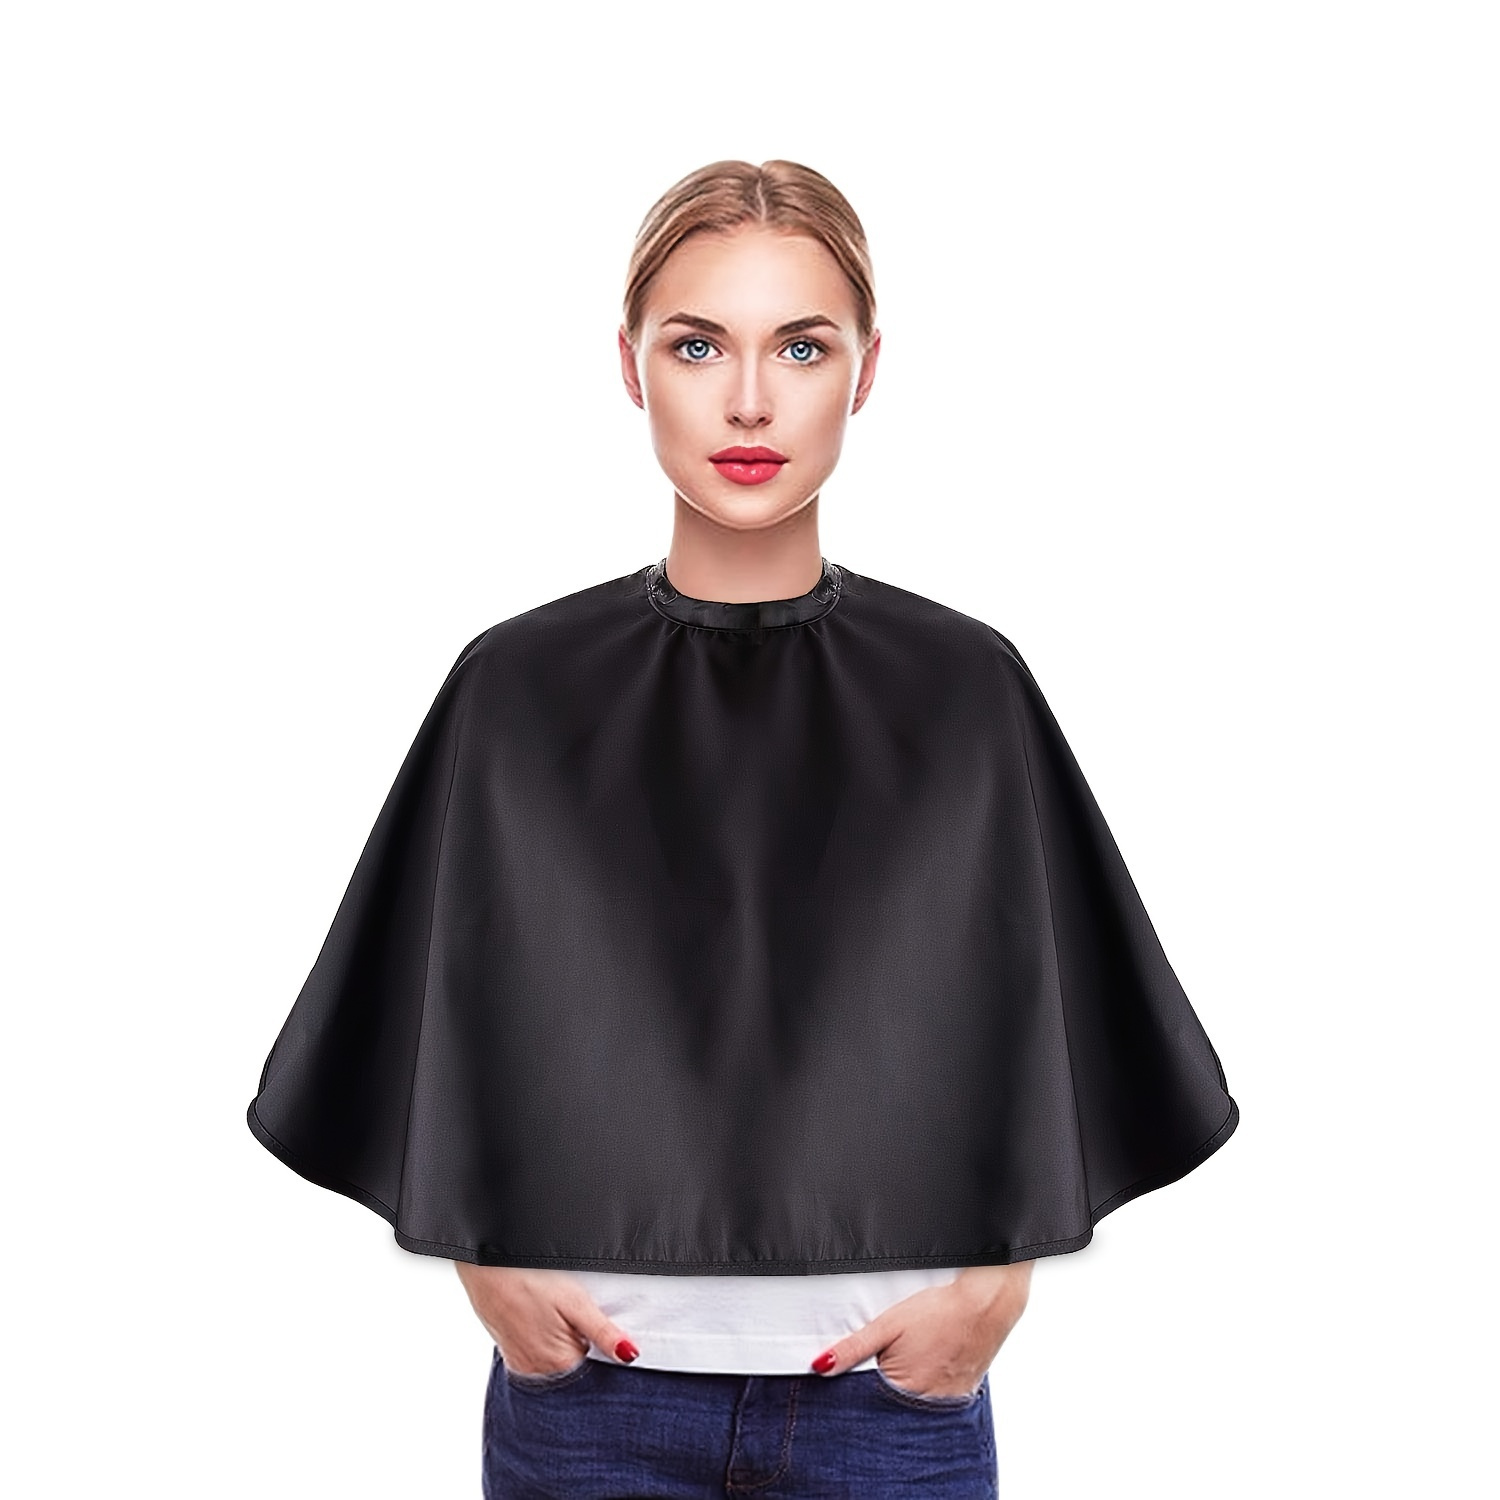 

Waterproof Makeup Cape For Beauty Salon Clients - Lightweight And Comb-out Beard Apron For Makeup Artists And Beauticians